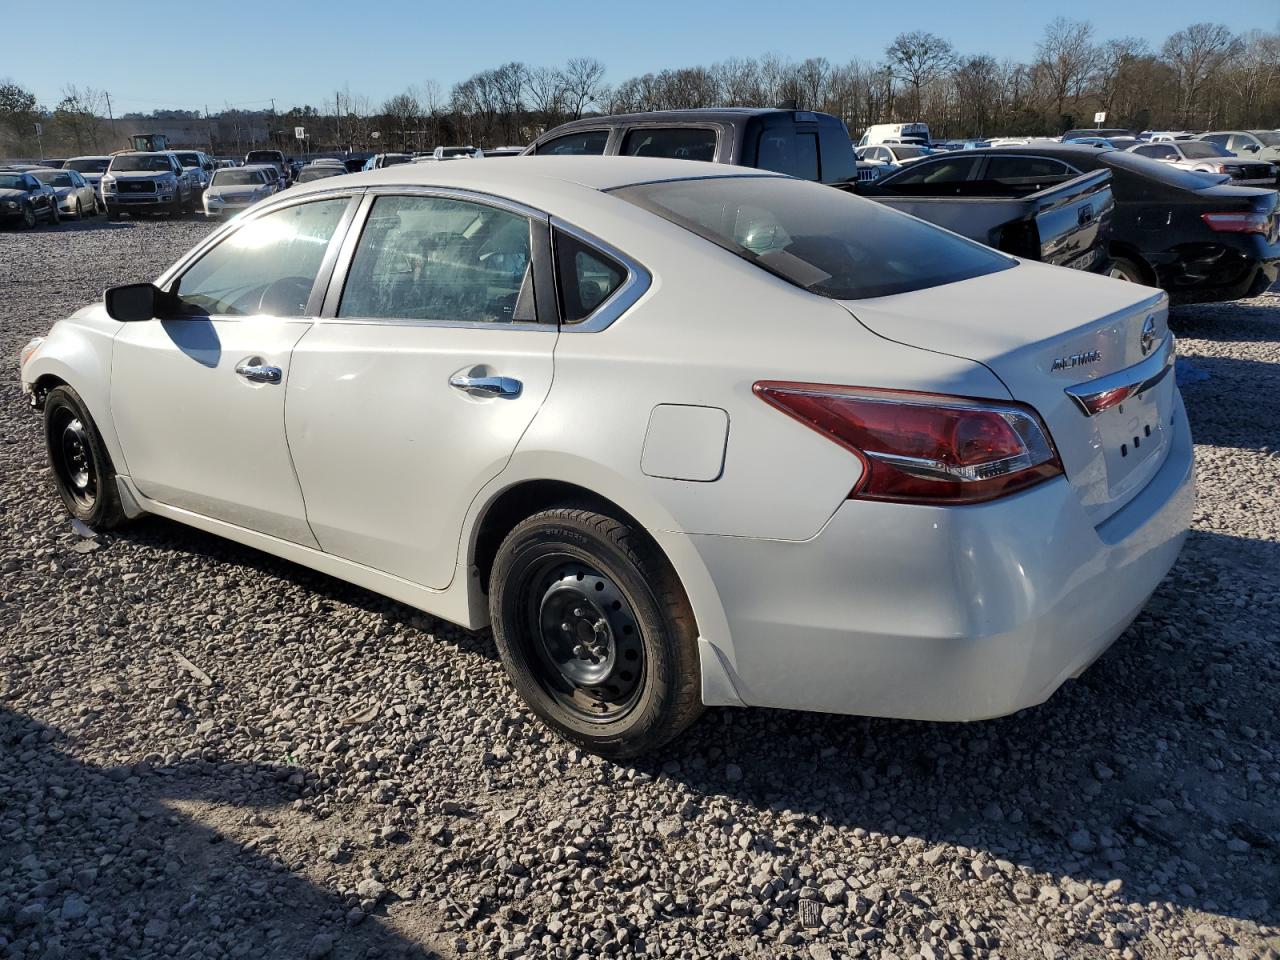 1N4AL3APXDN****** Used and Repairable 2013 Nissan Altima in AL - Hueytown